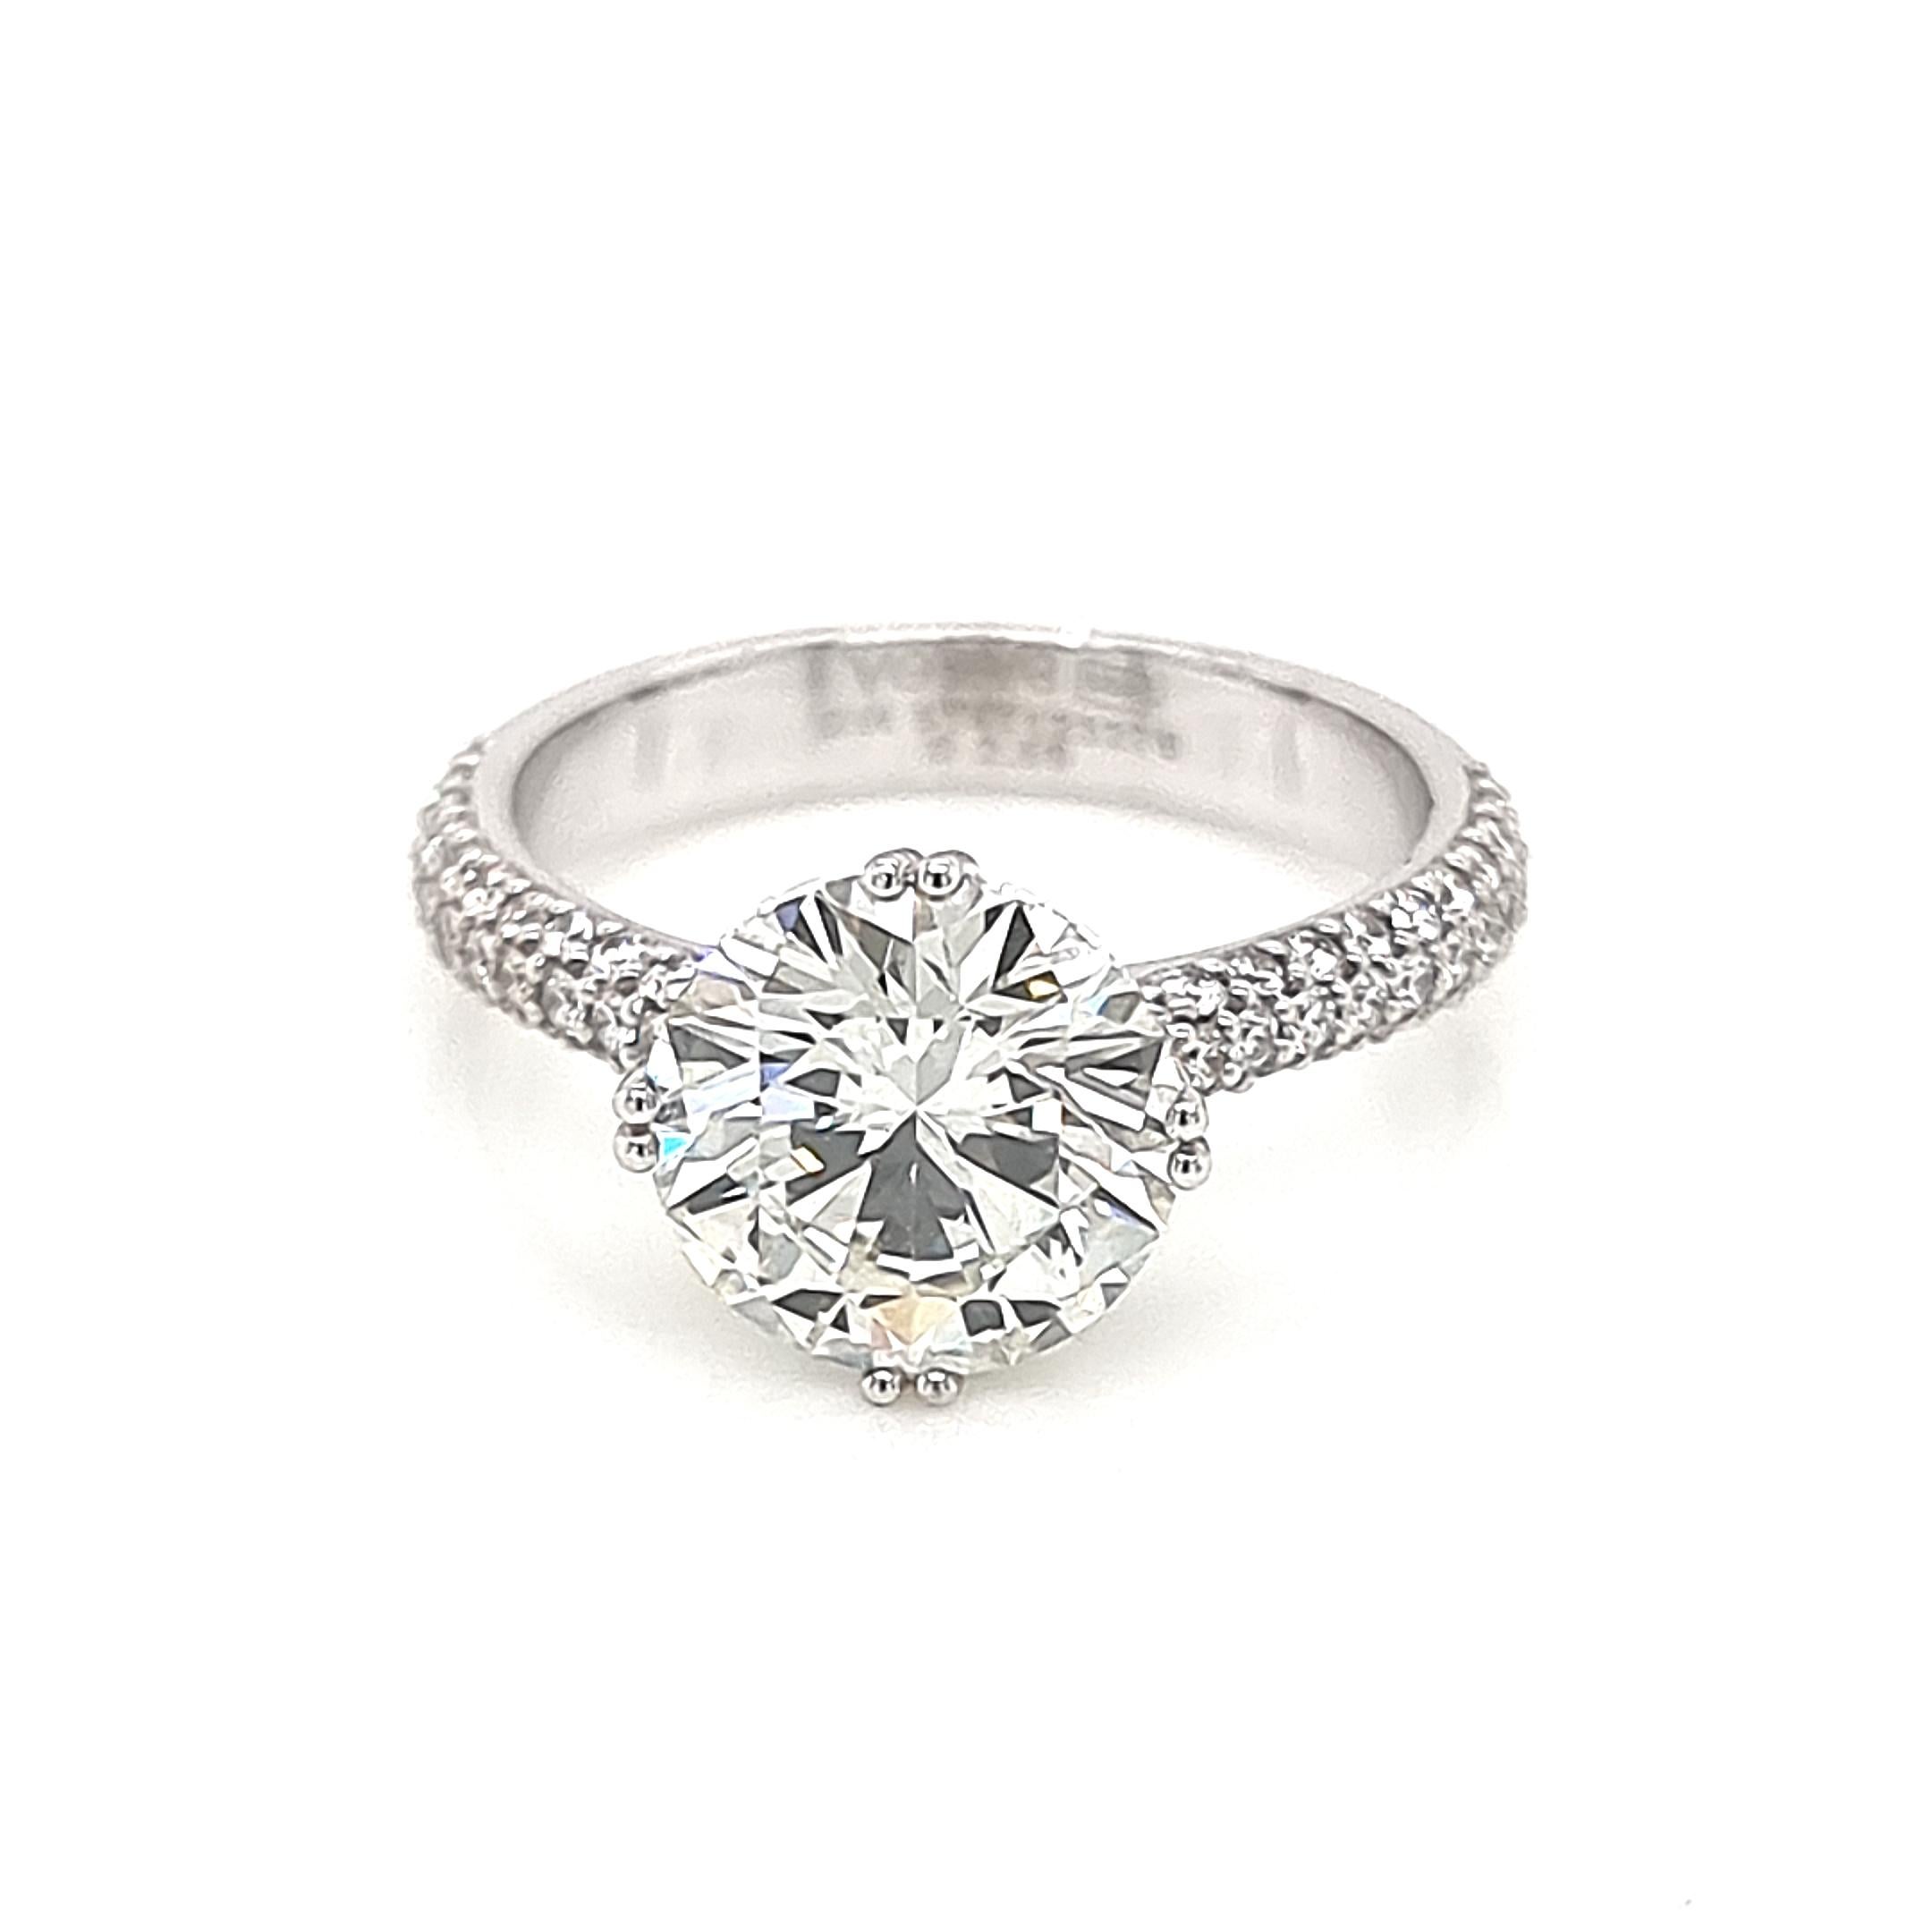 Wedding and Engagement Collection by VOTIVE

Introducing the Wedding and Engagement Collection by VOTIVE, where love and elegance intertwine to create cherished symbols of commitment. Behold this enchanting engagement ring, crafted in lustrous 18K